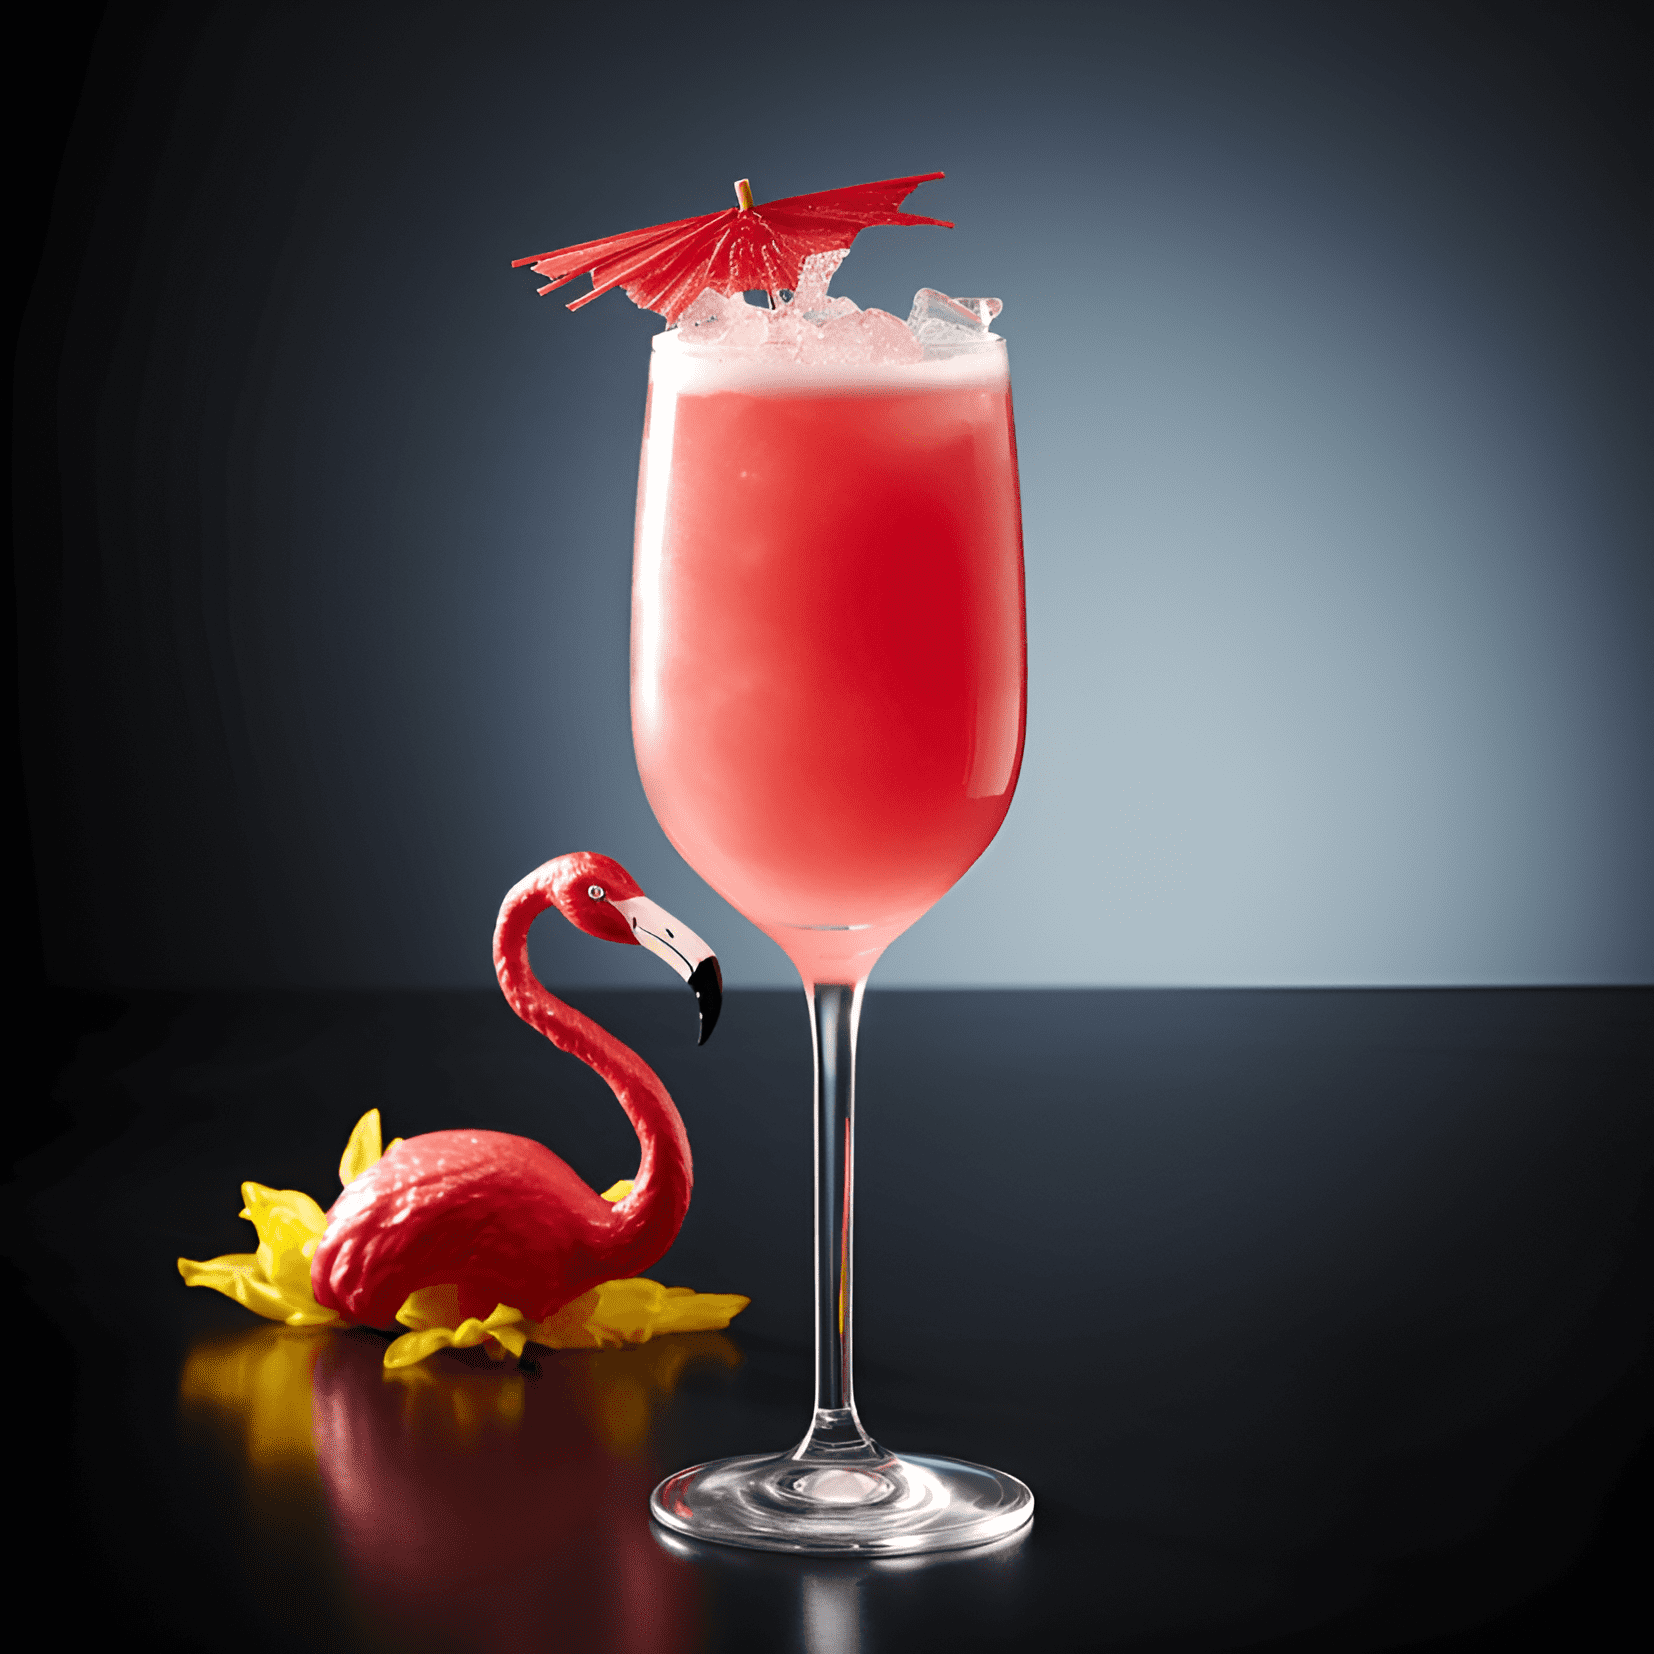 Pink Flamingo Cocktail Recipe - The Pink Flamingo cocktail has a sweet and fruity taste, with a hint of tartness from the lime juice. It is light and refreshing, making it perfect for warm weather or a tropical-themed party.